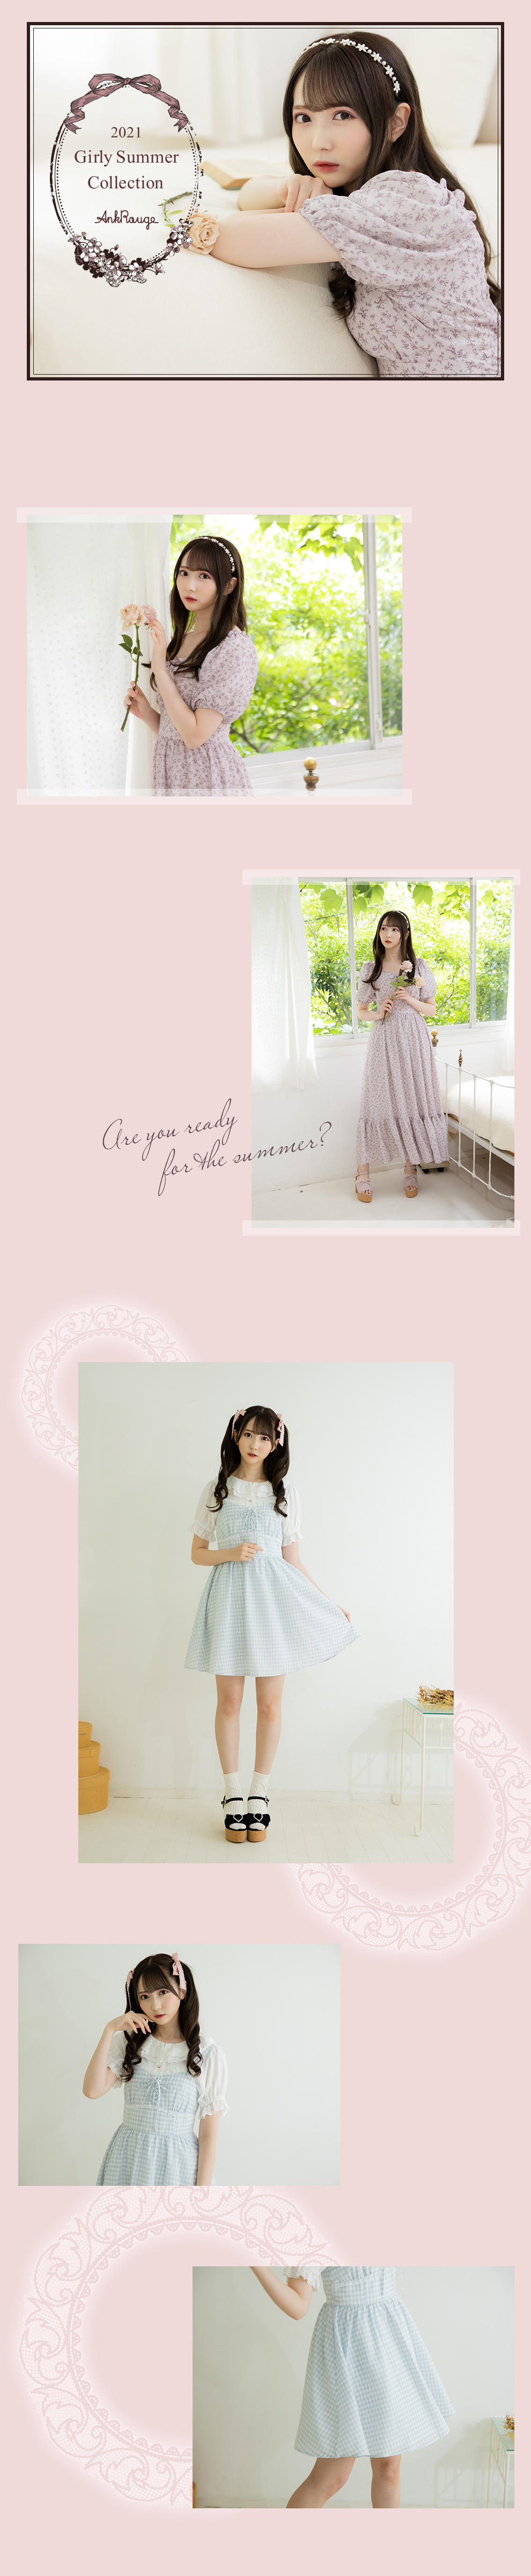 2021 Girly Spring Collection vol.6